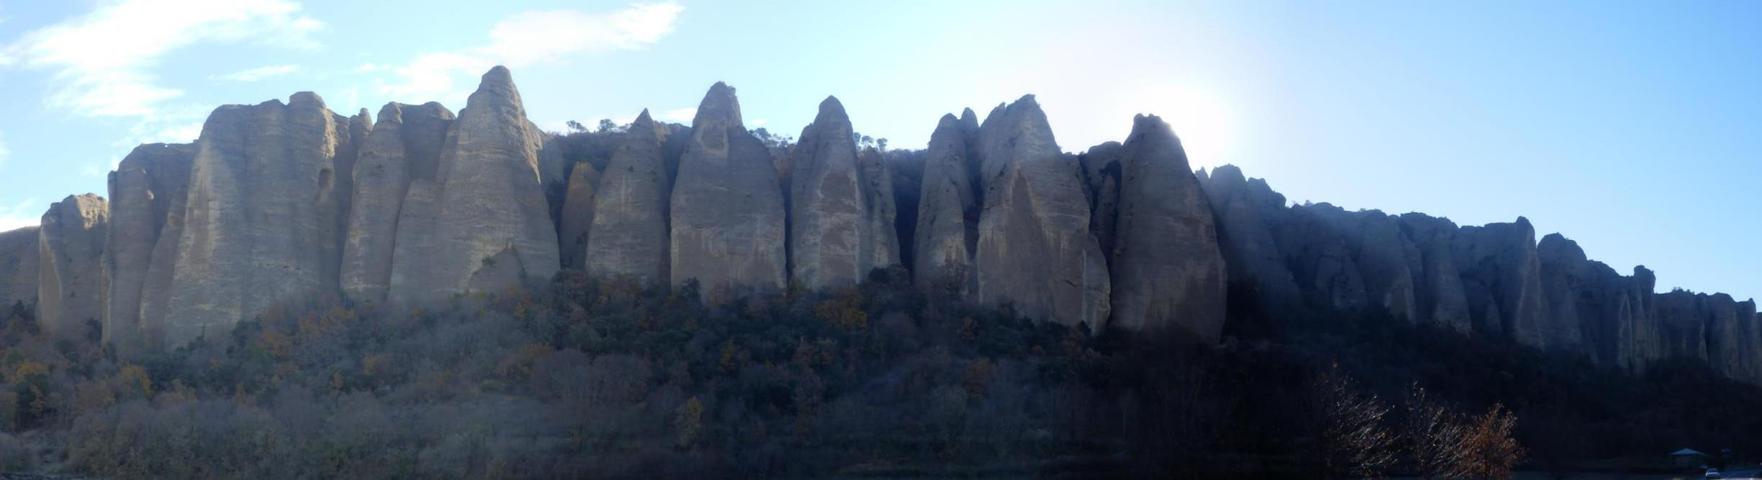 The amazing rock formation Les Pénitents